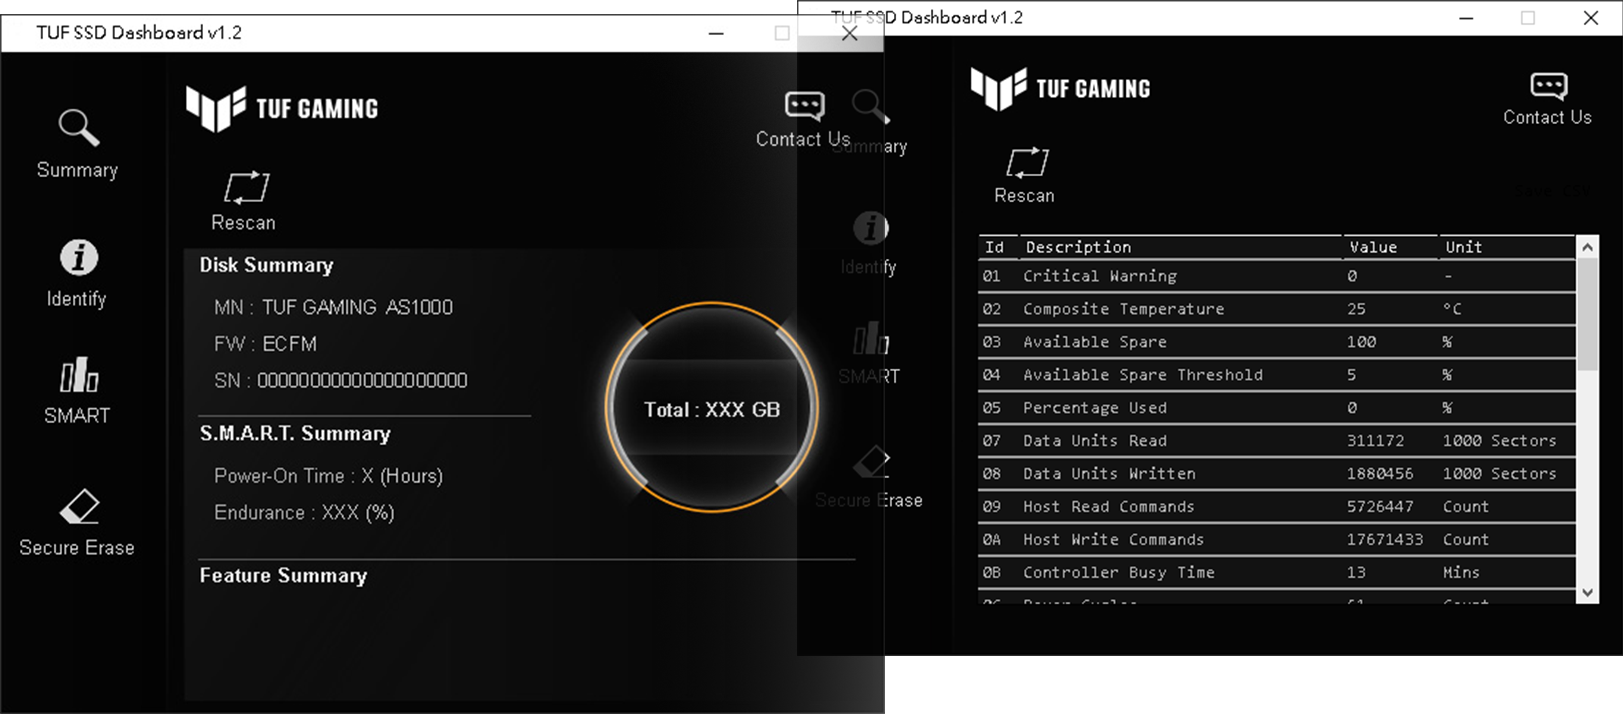 TUF Gaming AS1000 SSD Dashboard user interfaces